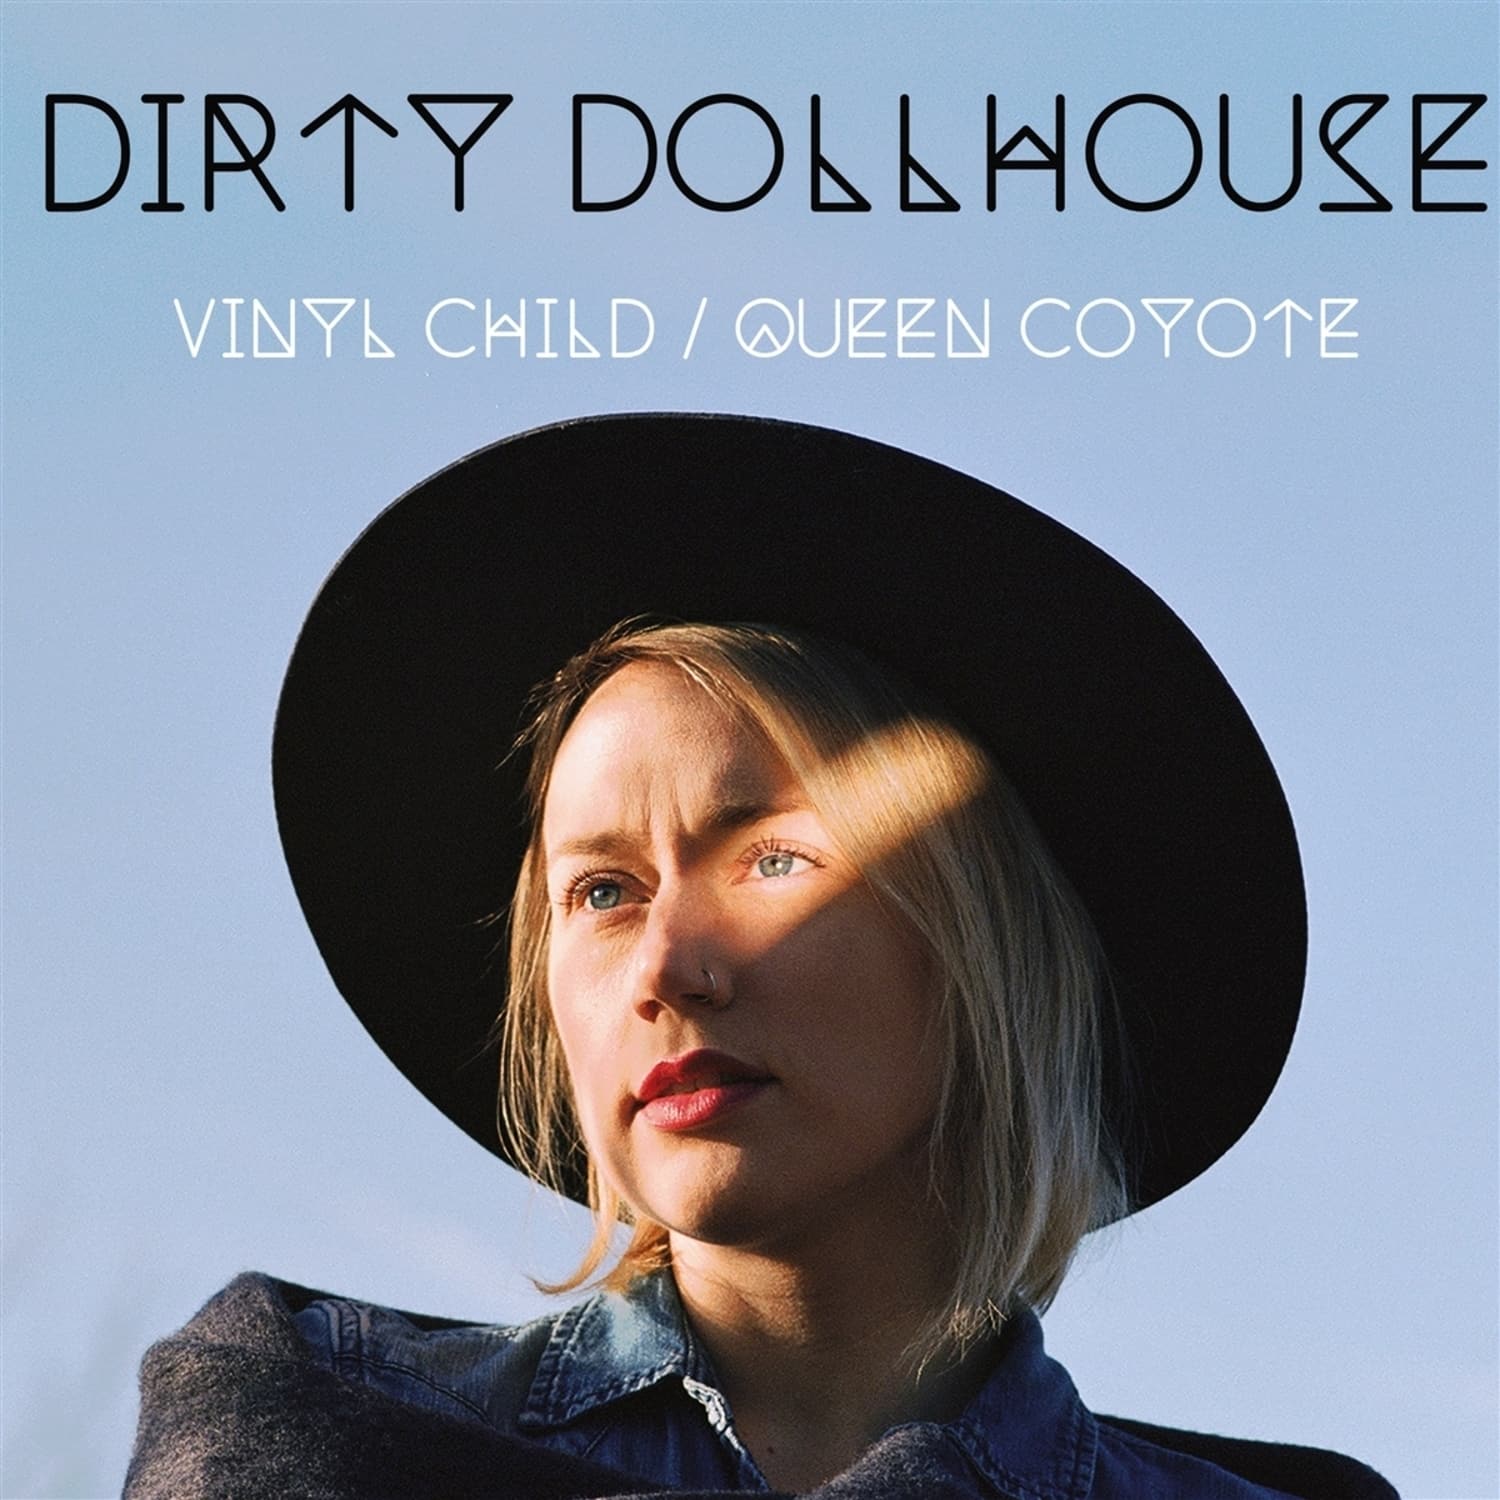 Dirty Dollhouse - VINYL CHILD / QUEEN COYOTE 